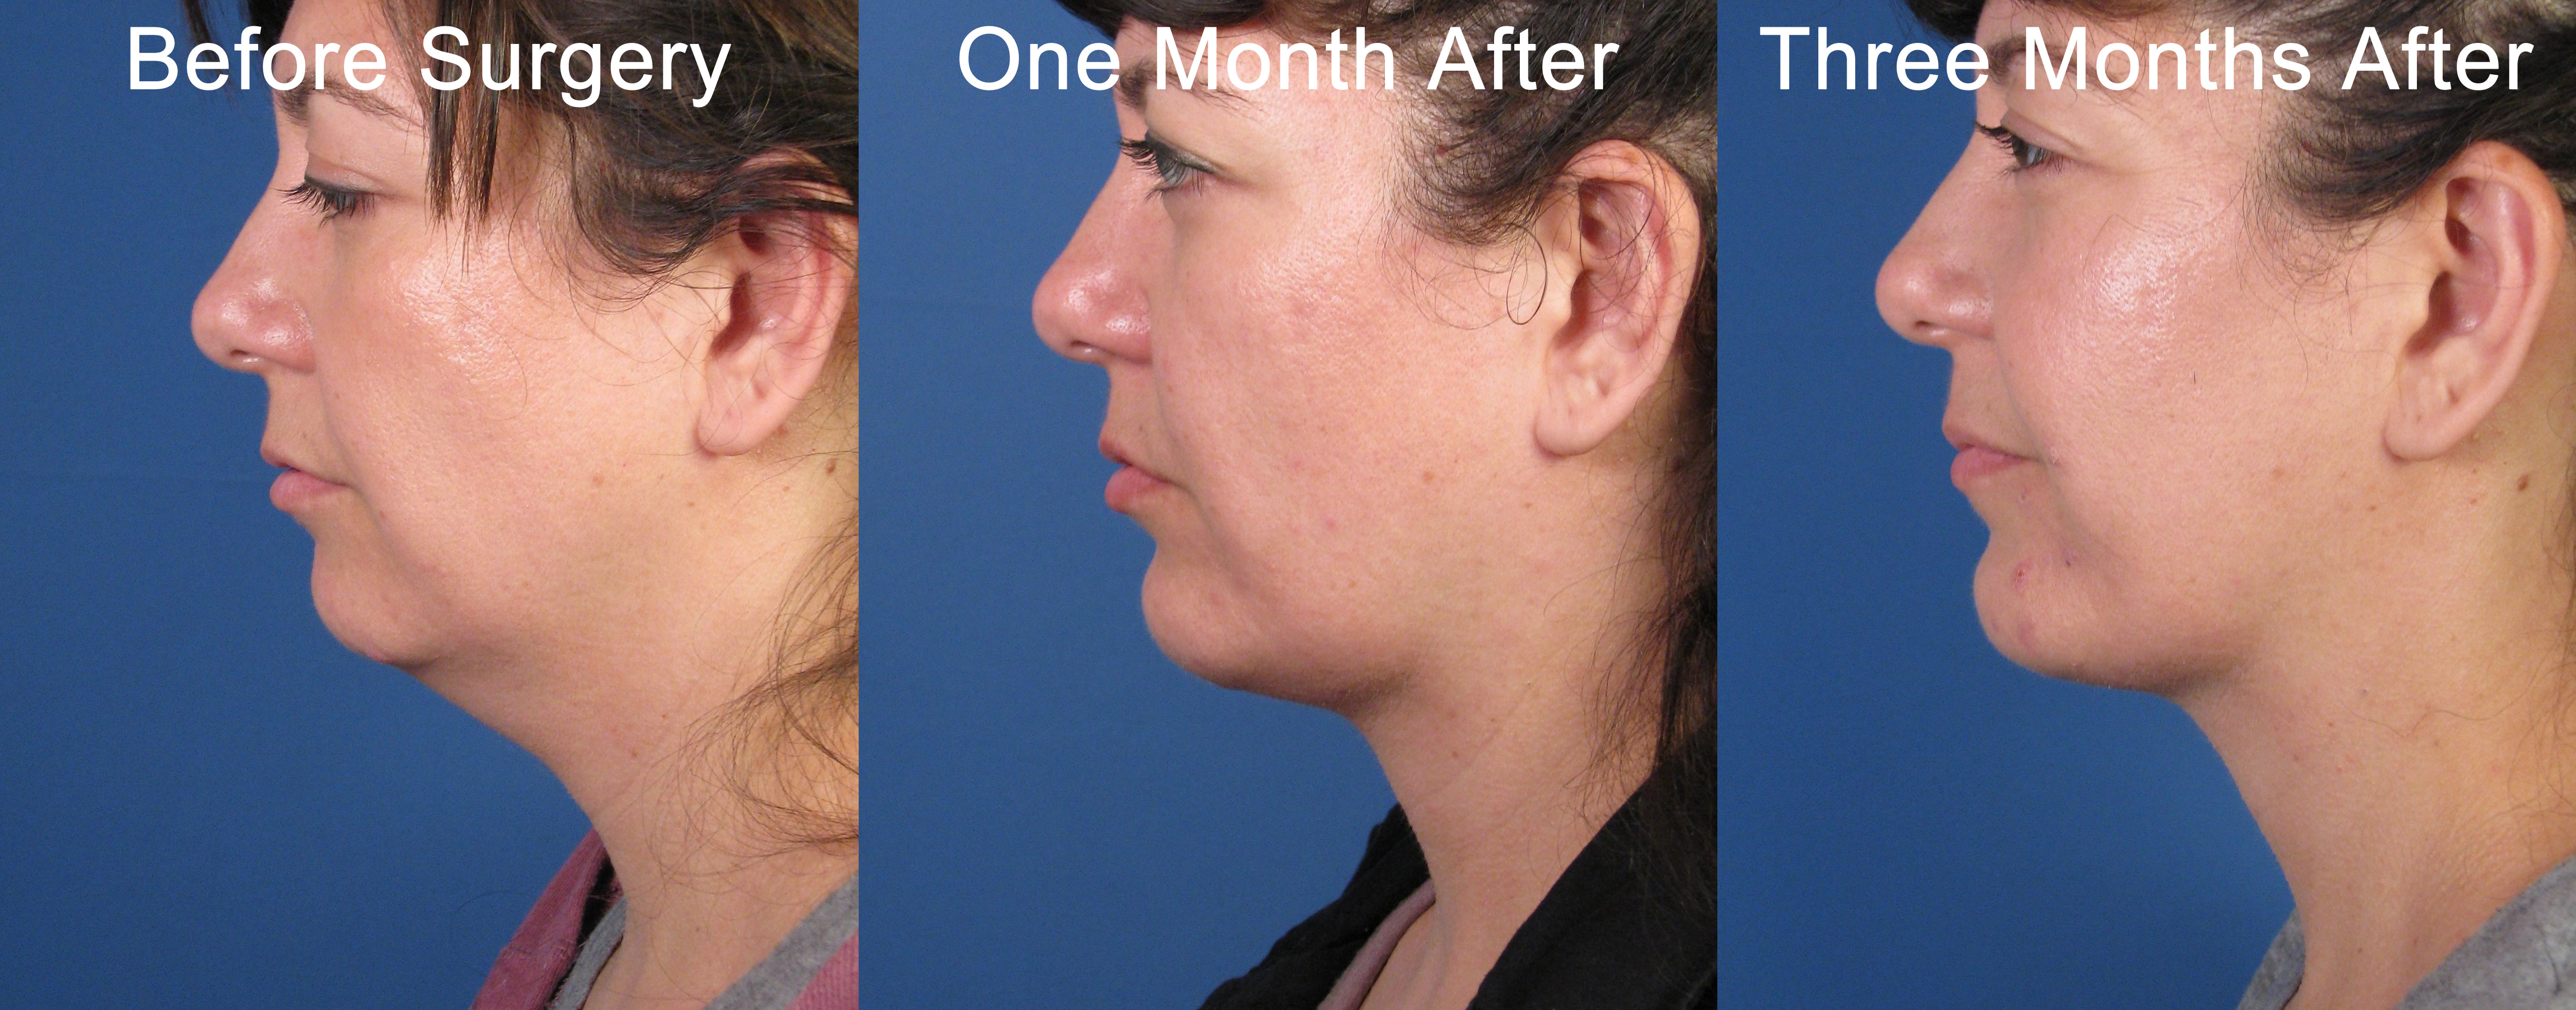 Liposuction double chin recovery, plastic surgery for